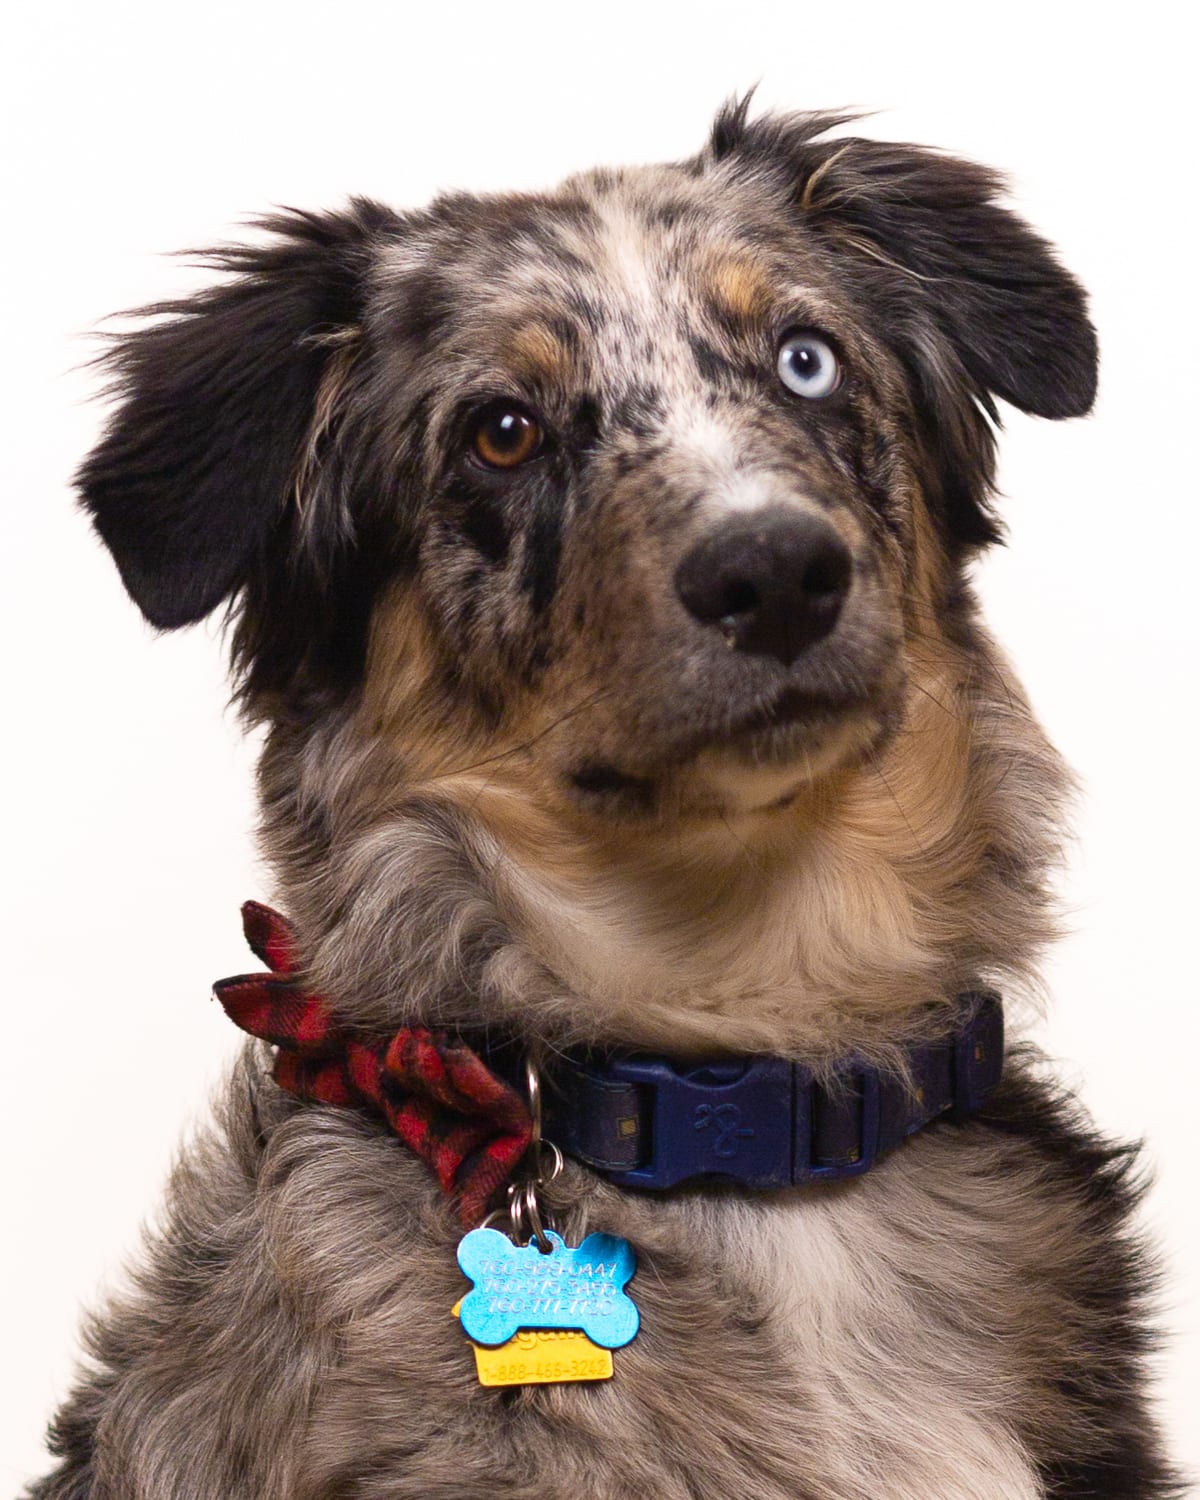 Merle-coated dog with a red scarf and blue collar against a neutral background.